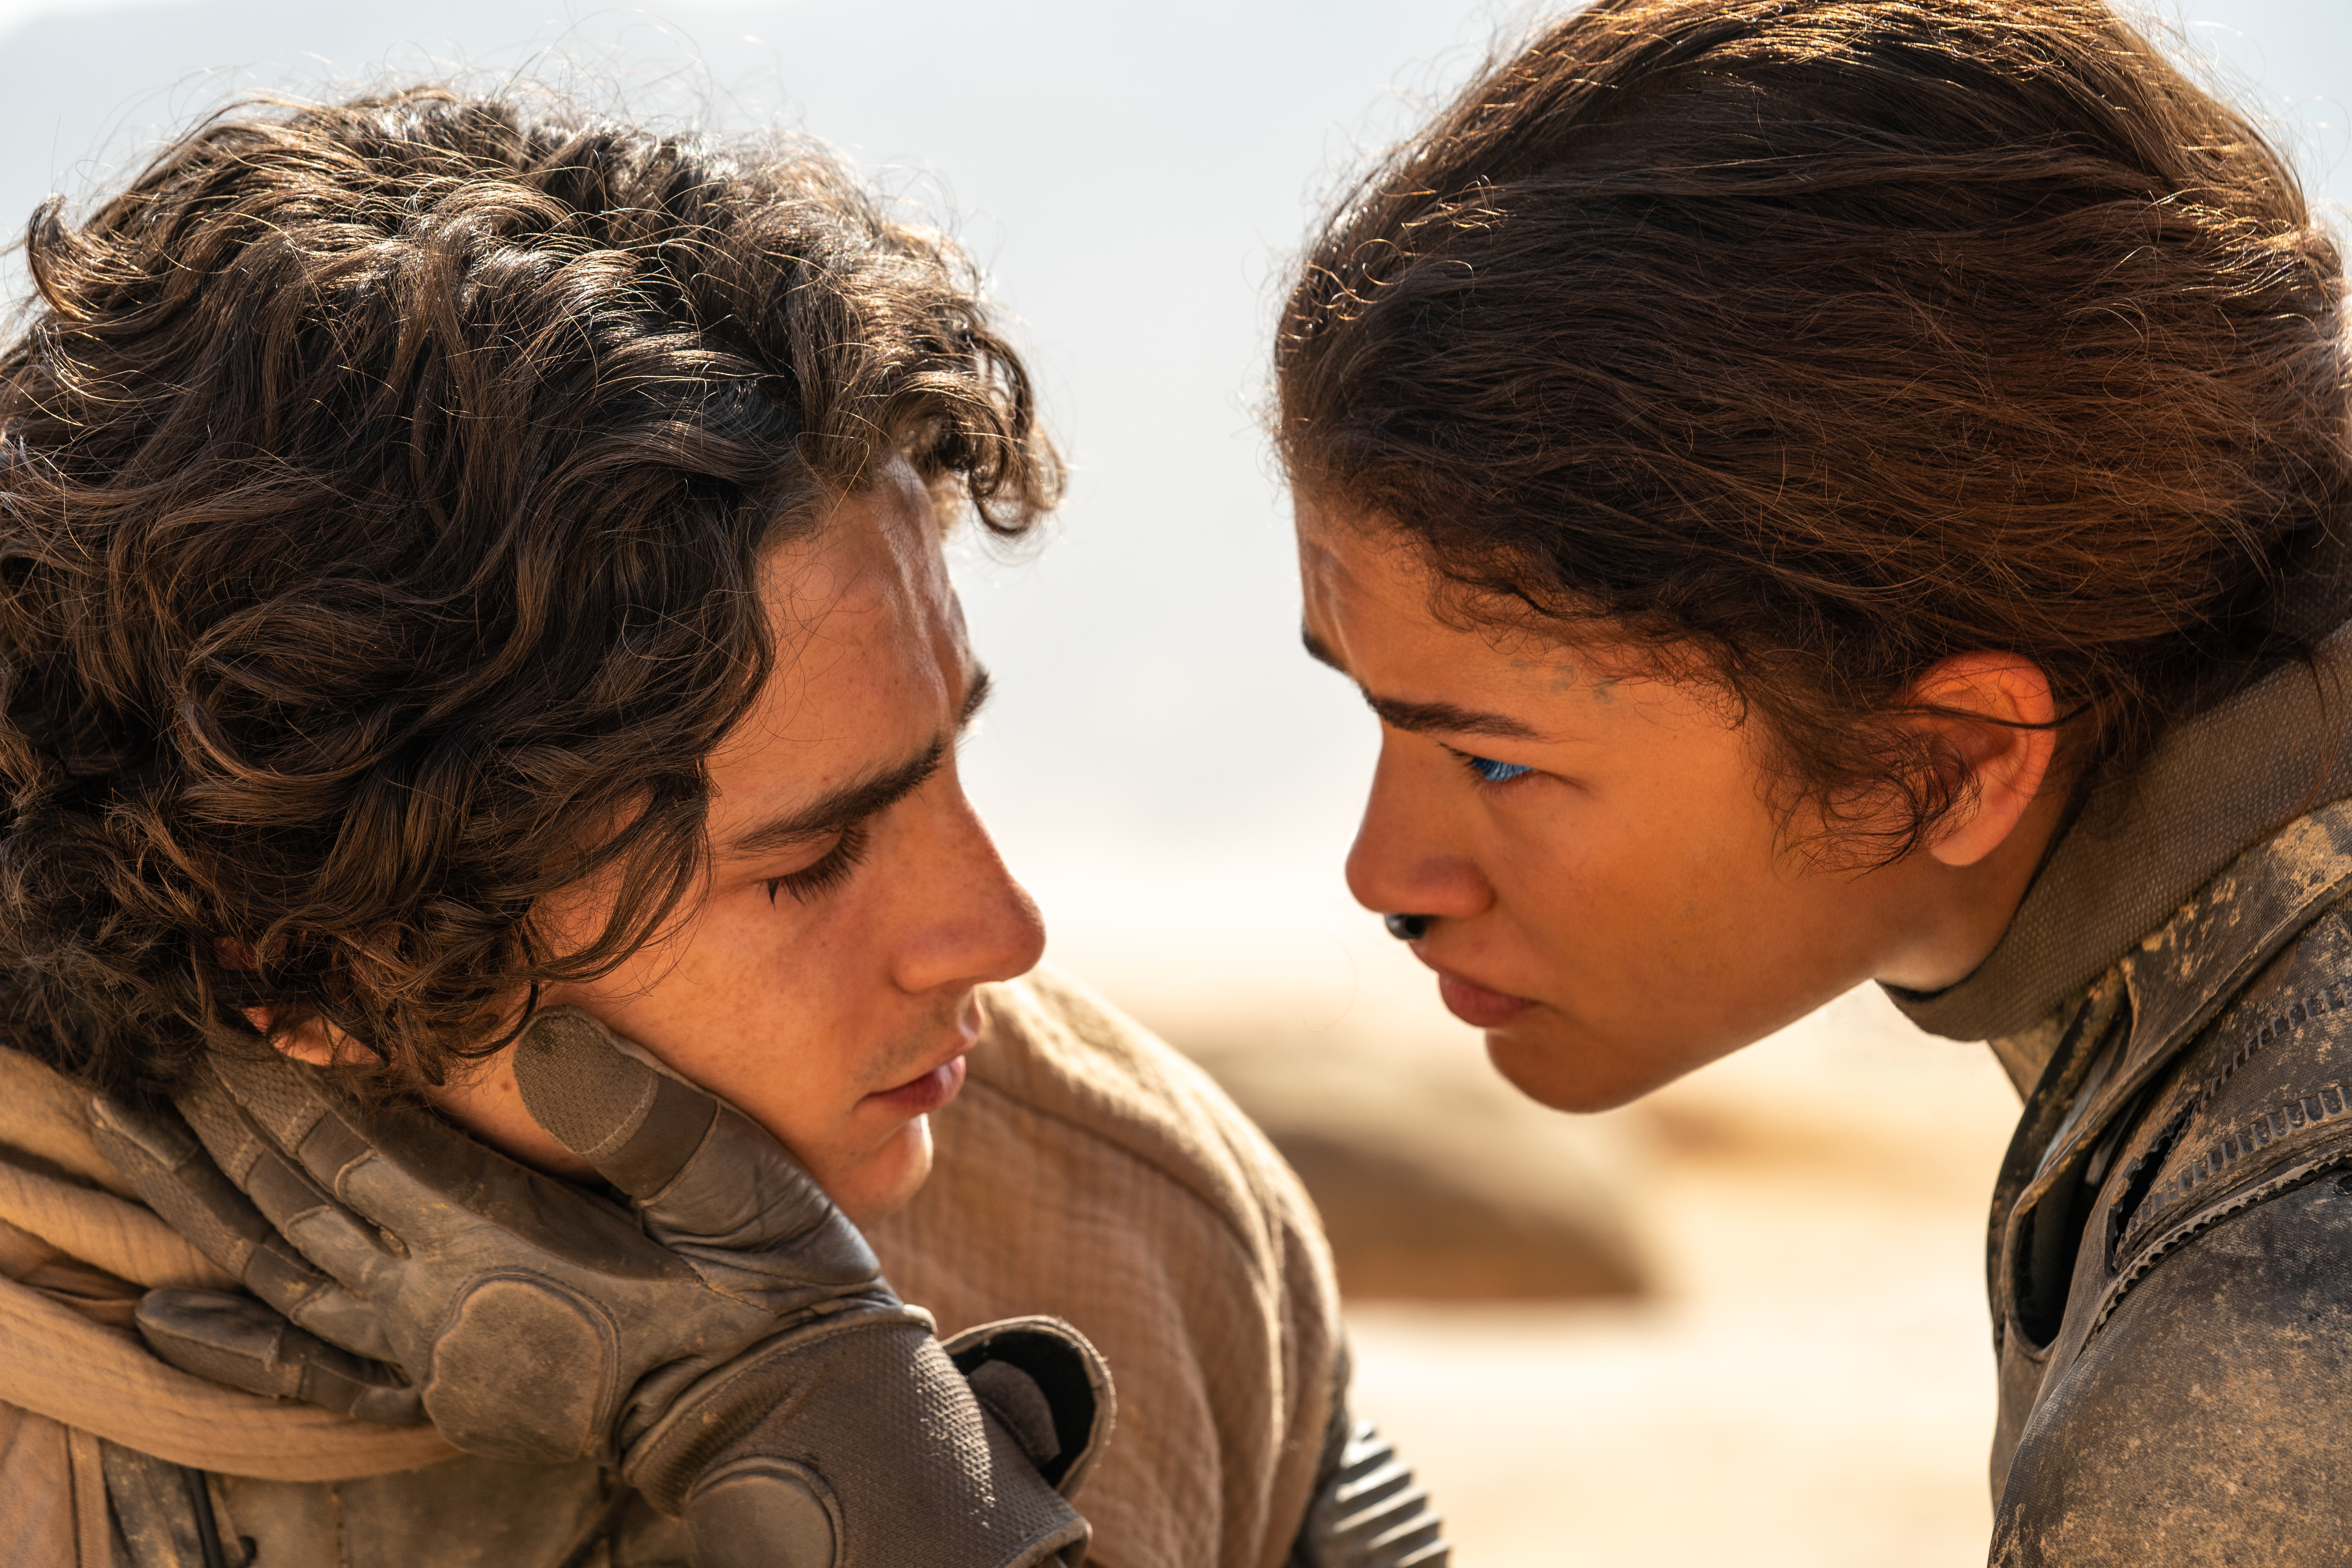 Warner Bros. have released the official trailer the highly anticipated sequel Dune: Part Two.